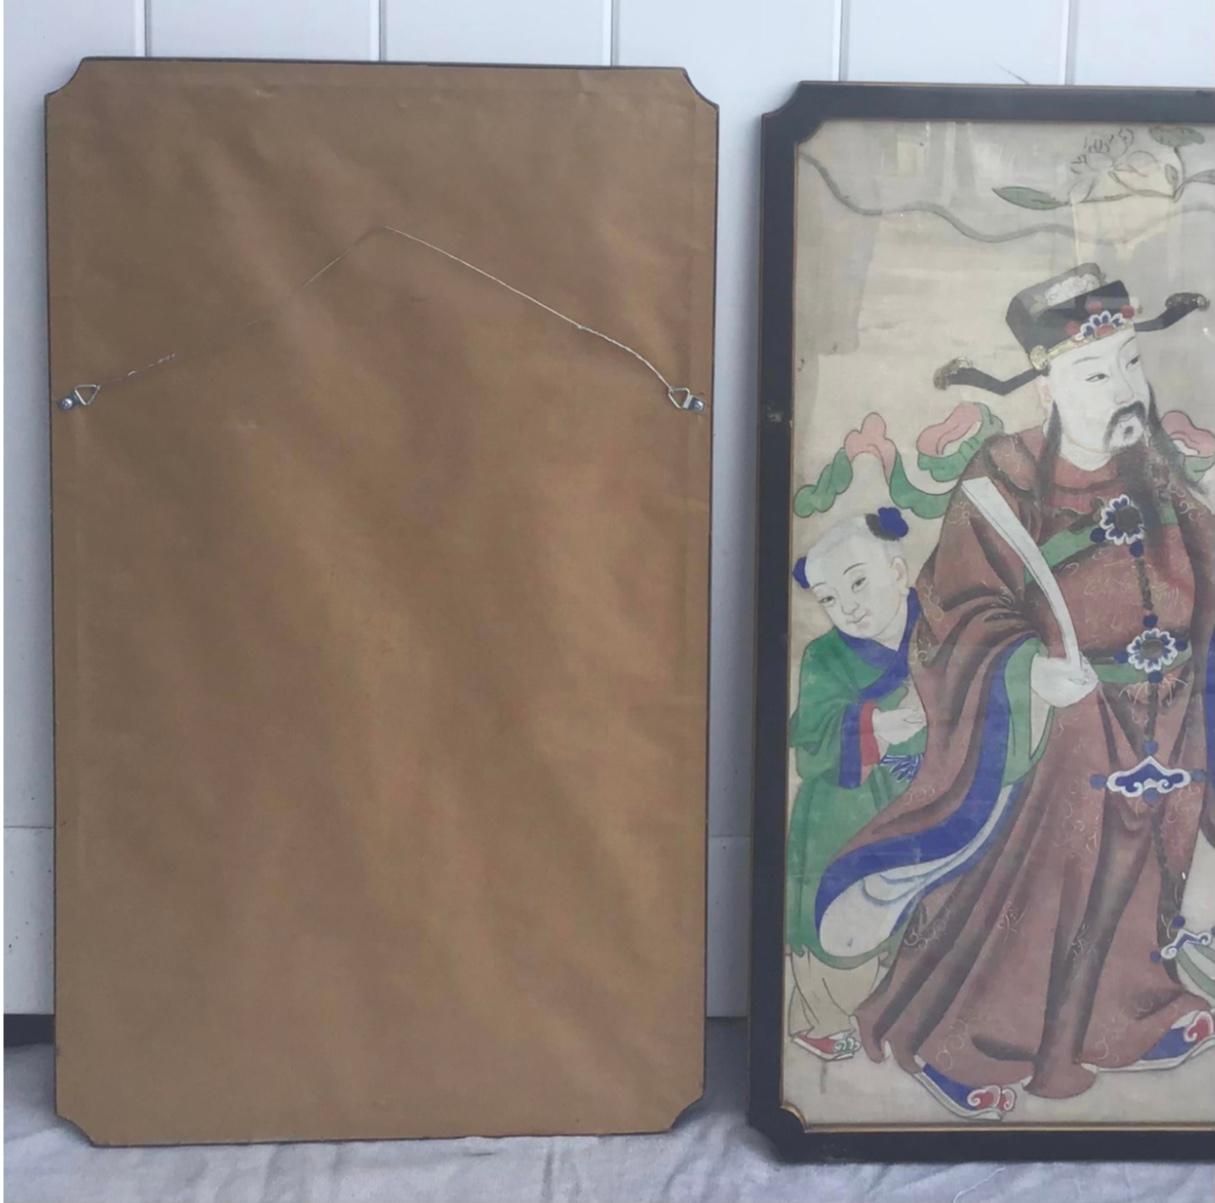 A pair of 19th century Chinese painted fabric panels. Now framed in matching black frames with gilt highlights. Very fine pieces with gorgeous masterful work. Very detailed with raised highlights. Appears to be watercolor or gouache on silk.